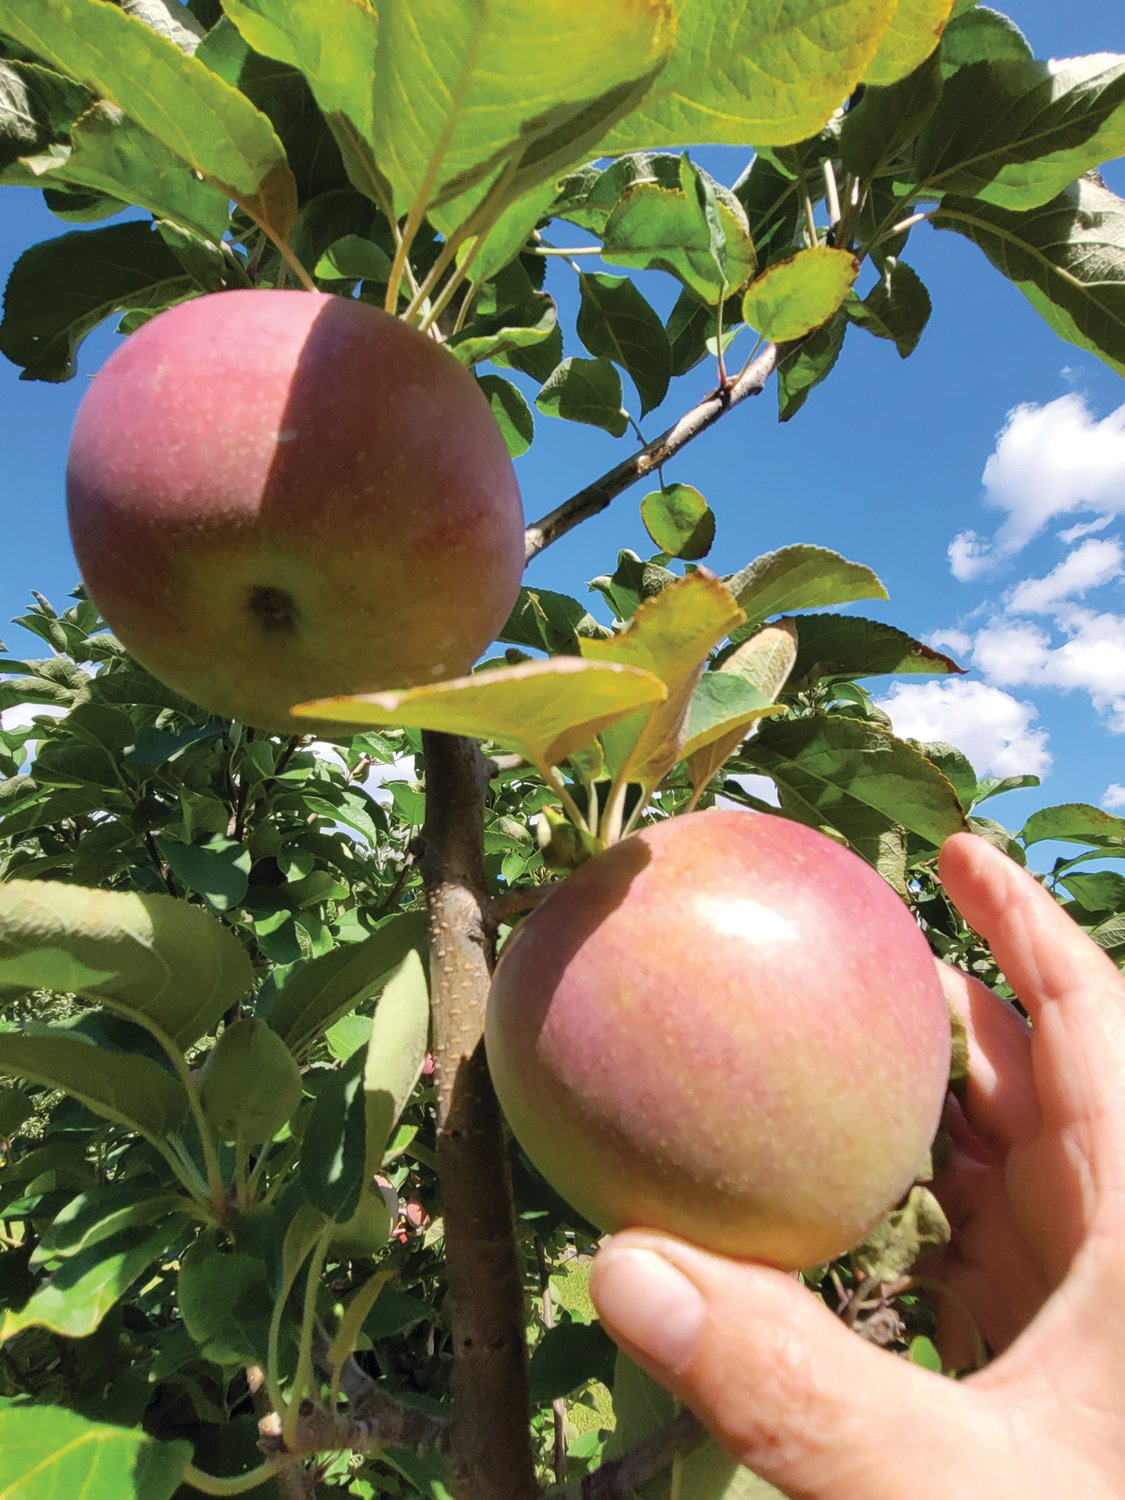 RIPE FOR PICKING: Mary Lou D’Andrea and her husband Lou own Appleland Orchards in Smithfield. She reaches up to pick a ripe apple this week, in preparation for this weekend’s Apple Festival in Johnston.